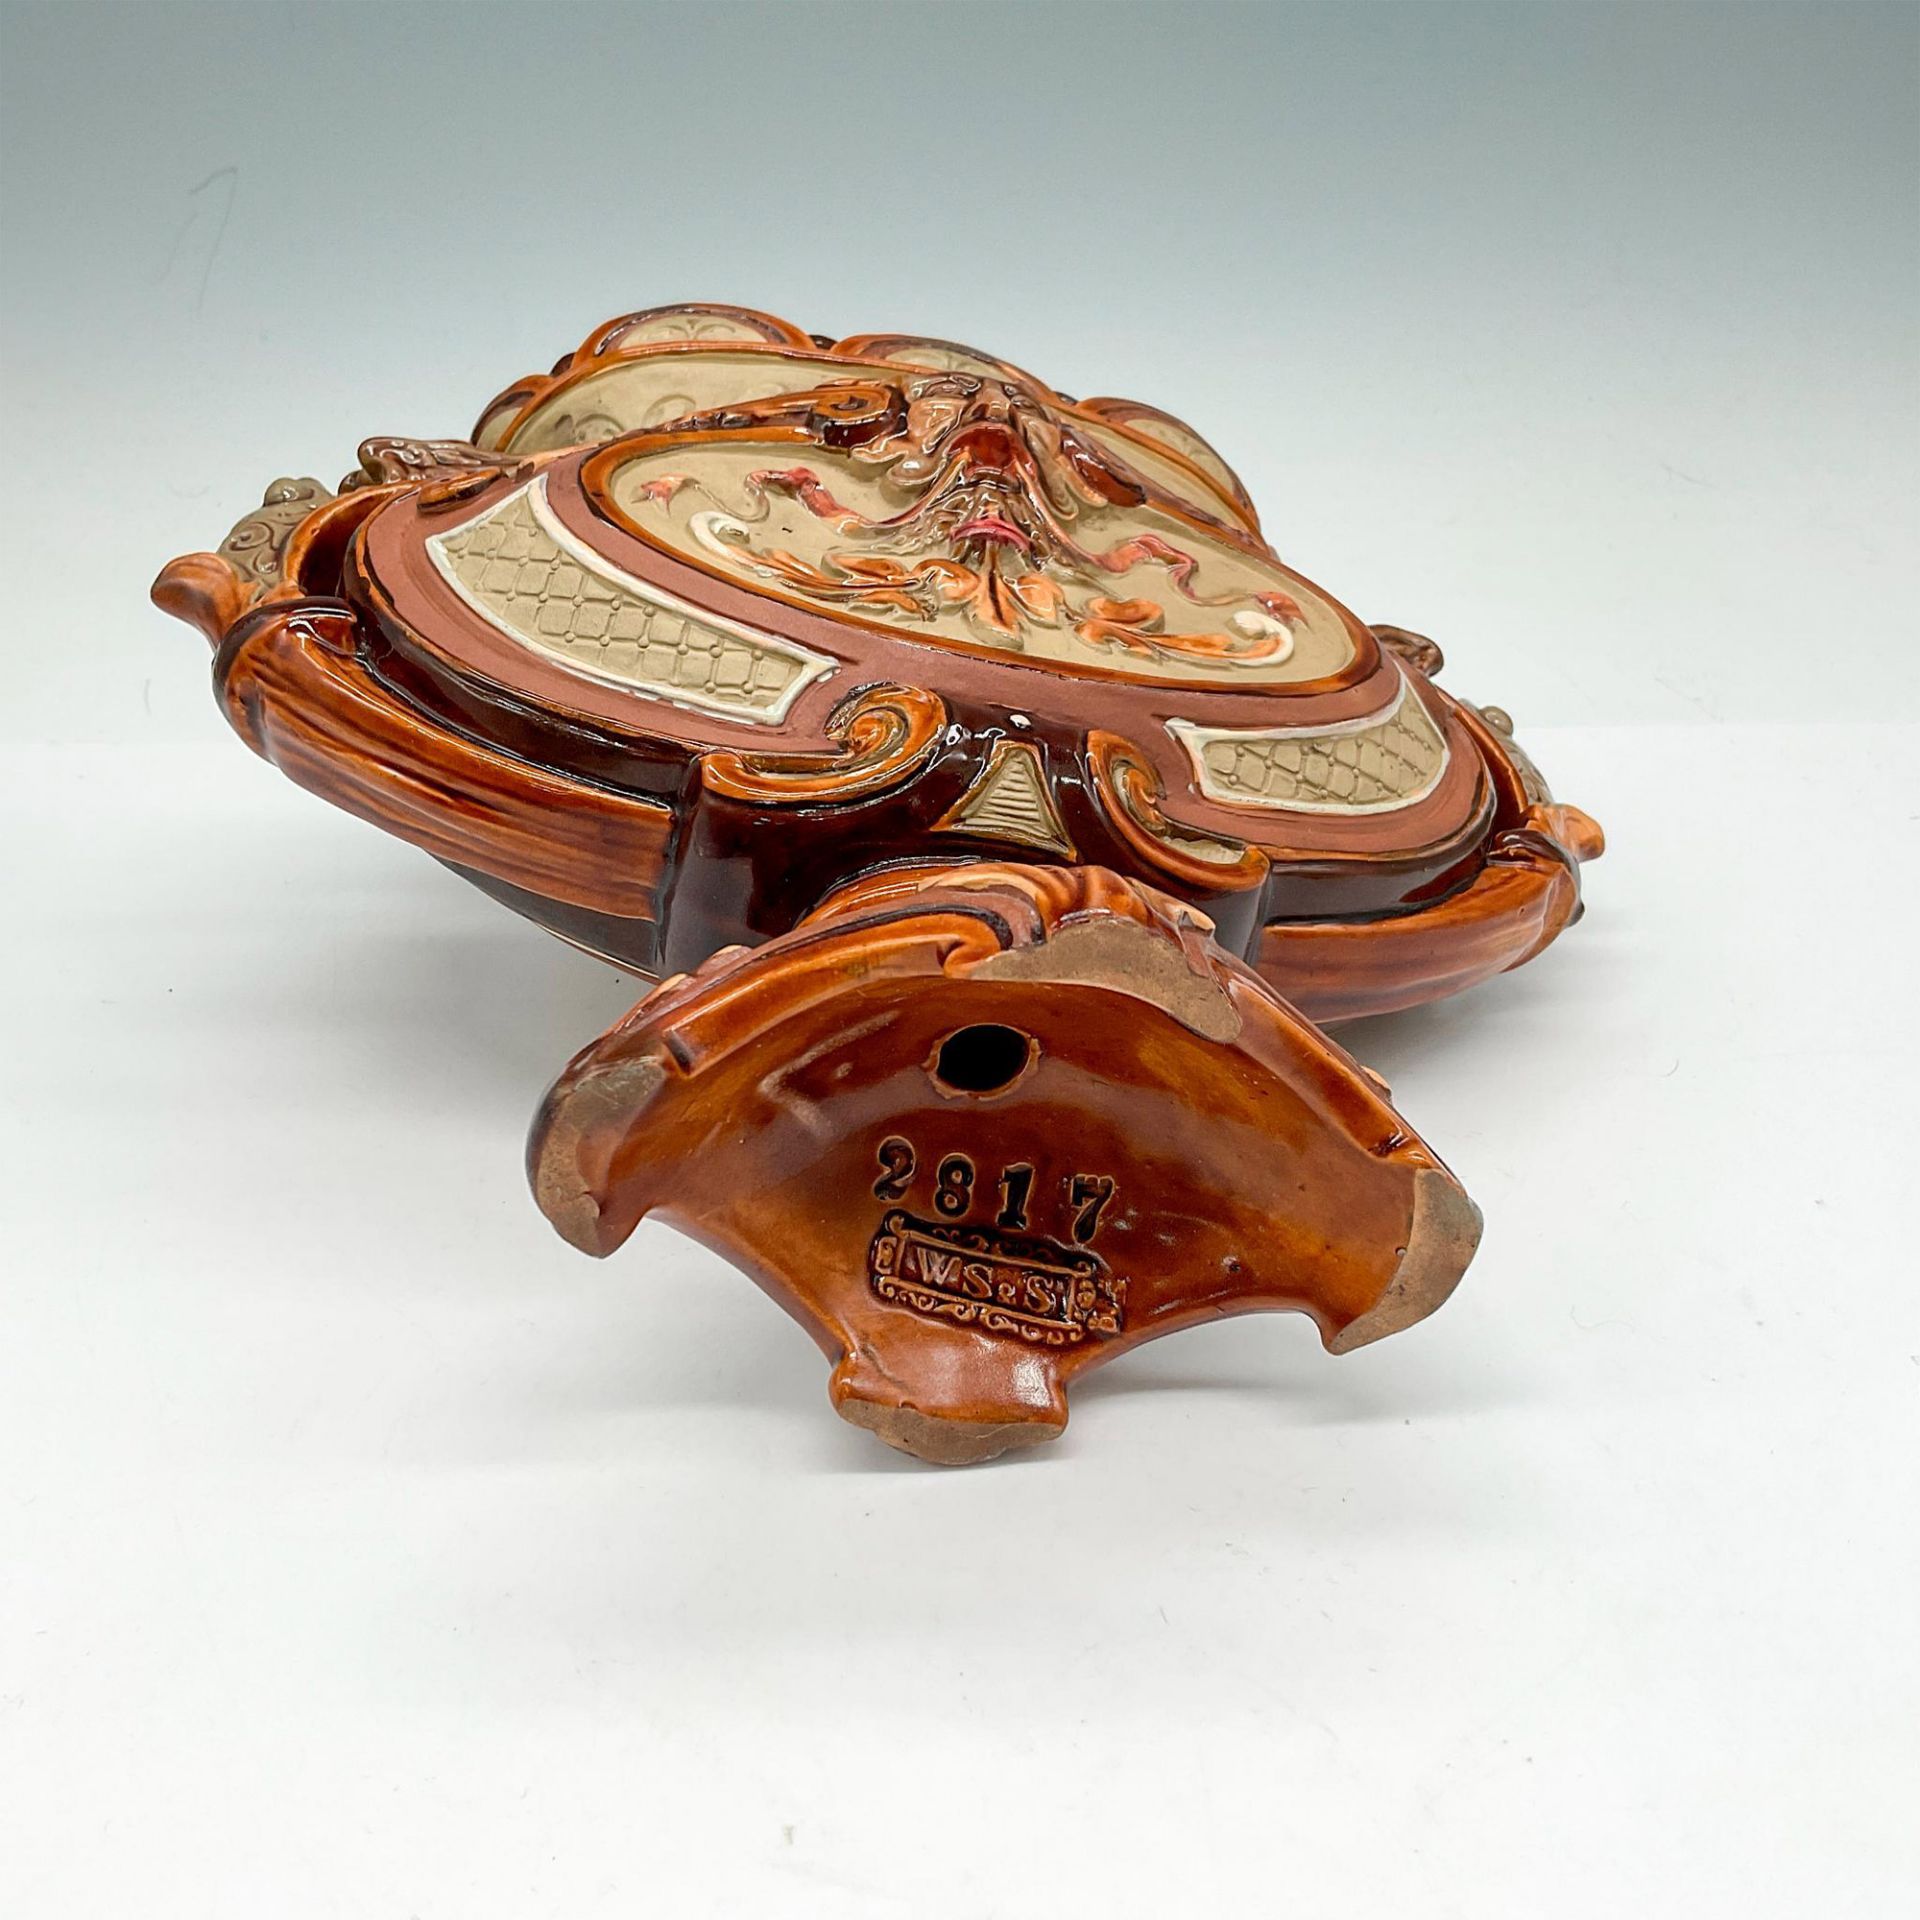 William Schiller & Son Majolica Footed Console Bowl - Image 3 of 3